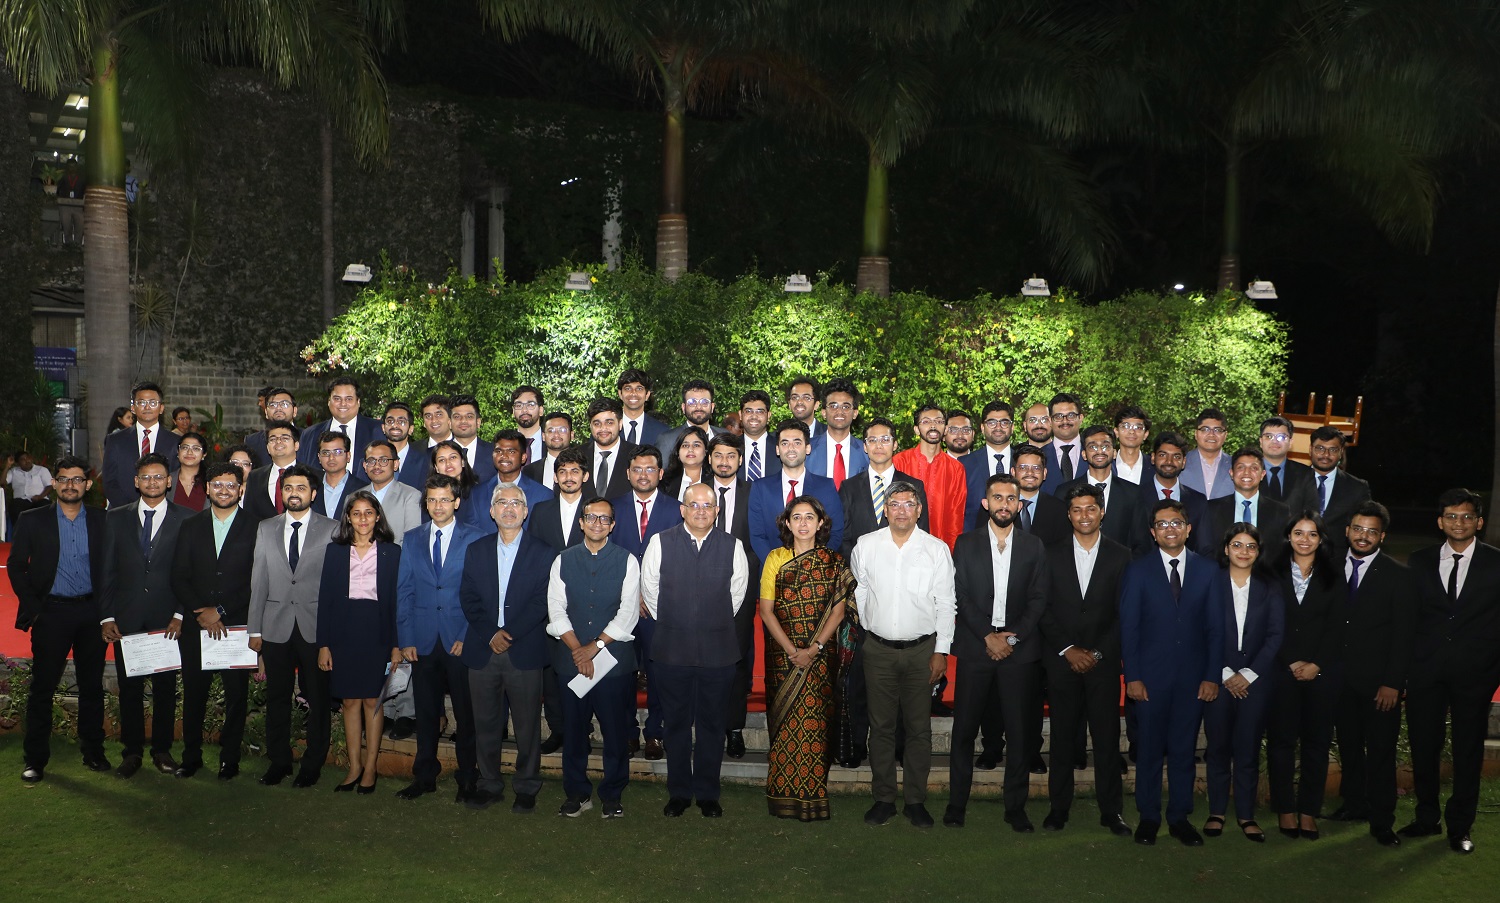 A group picture of the DML (Director’s Merit List) and DHL (Director’s Honorary List) award winners along with the Chief Guest, Ms Rashmi Mohanty, Prof. Rishikesha T Krishnan, Director, IIM Bangalore, Prof. Rahul Dé, Dean, Programmes, Prof. Sourav Mukherji, Dean, Alumni Relations & Development, Prof. Ashis Mishra, Chairperson, Admissions & Financial Aid, and Prof. R Srinivasan, Chairperson, PGP and PGPBA.